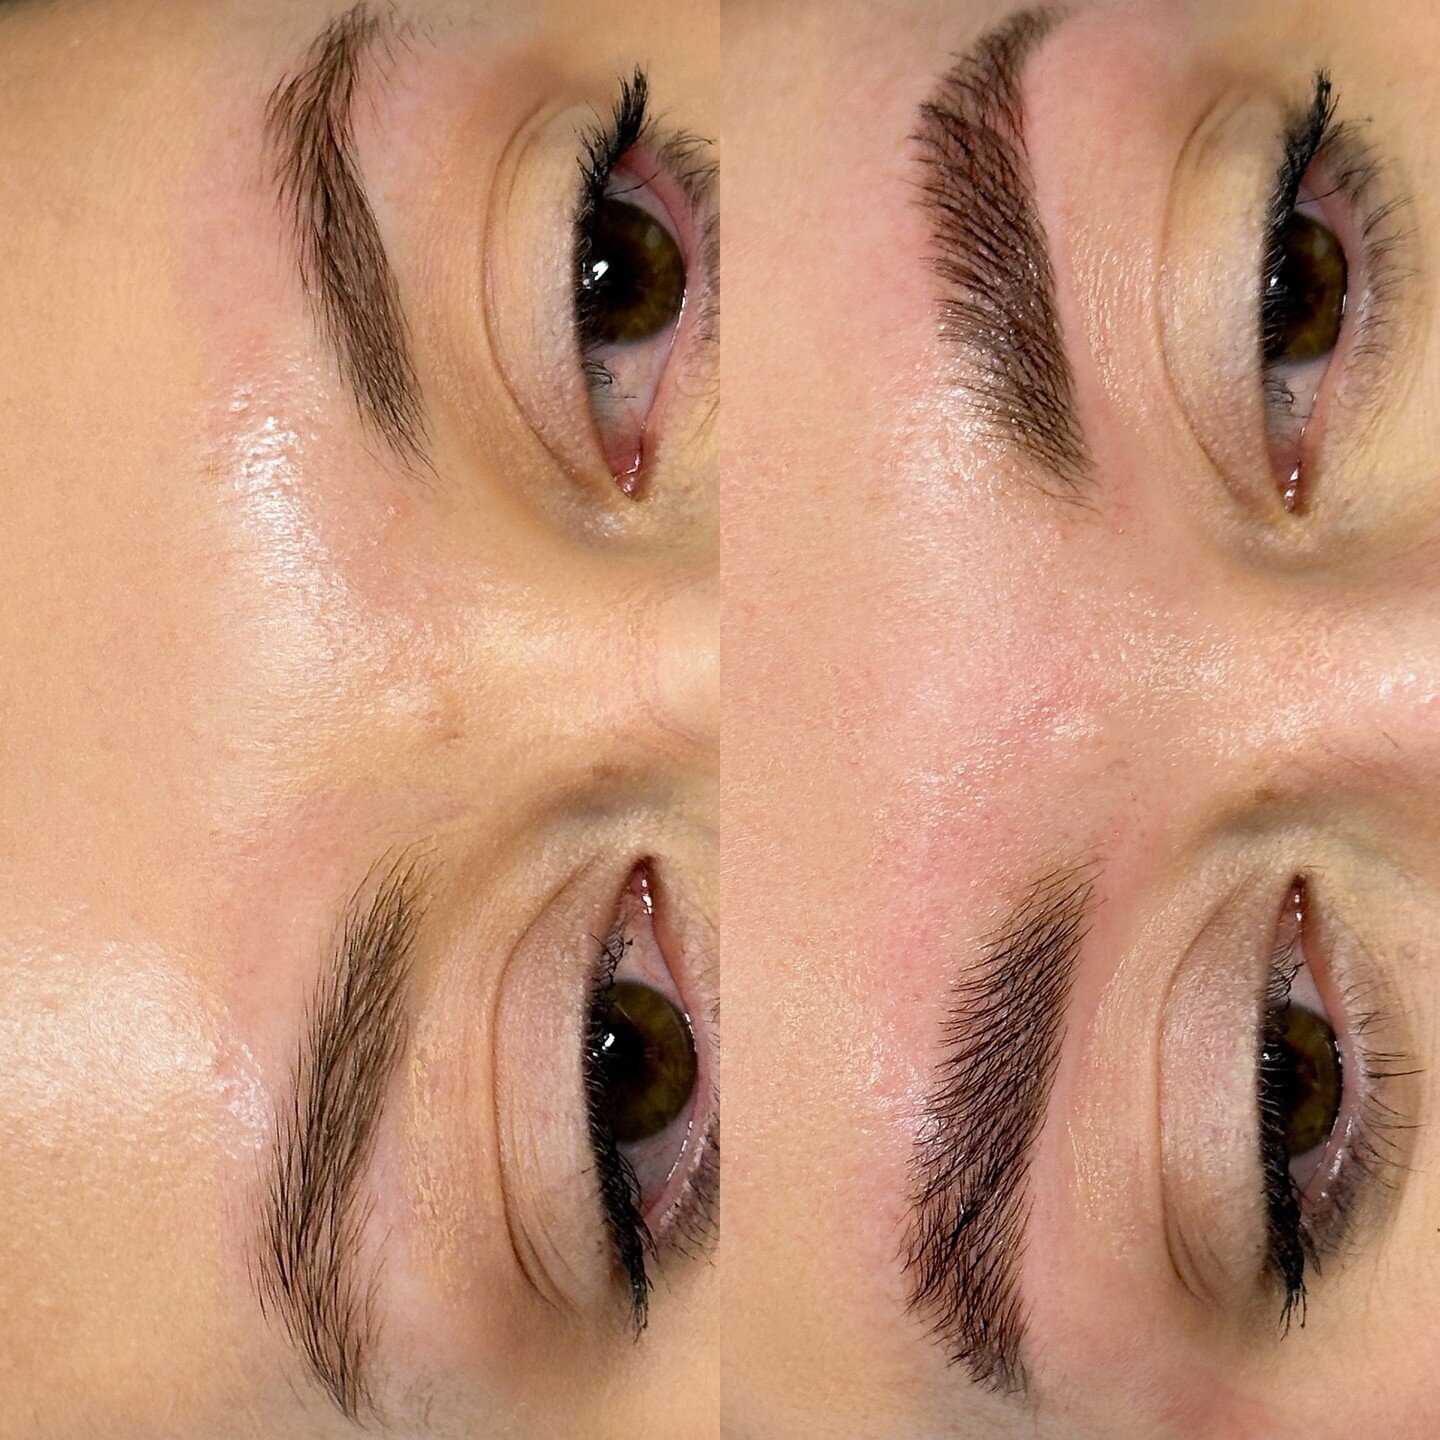 Literally swooning over this brow transformationnnnnn 🥰⁠
⁠
We did a brow lamination with a tint and wax. ⁠
⁠
Only a few days left of May! Get this exact service for $75 before the end of the month! (you save $50+) 👀⁠
⁠
--⁠
#lansdale #lansdalesalon 